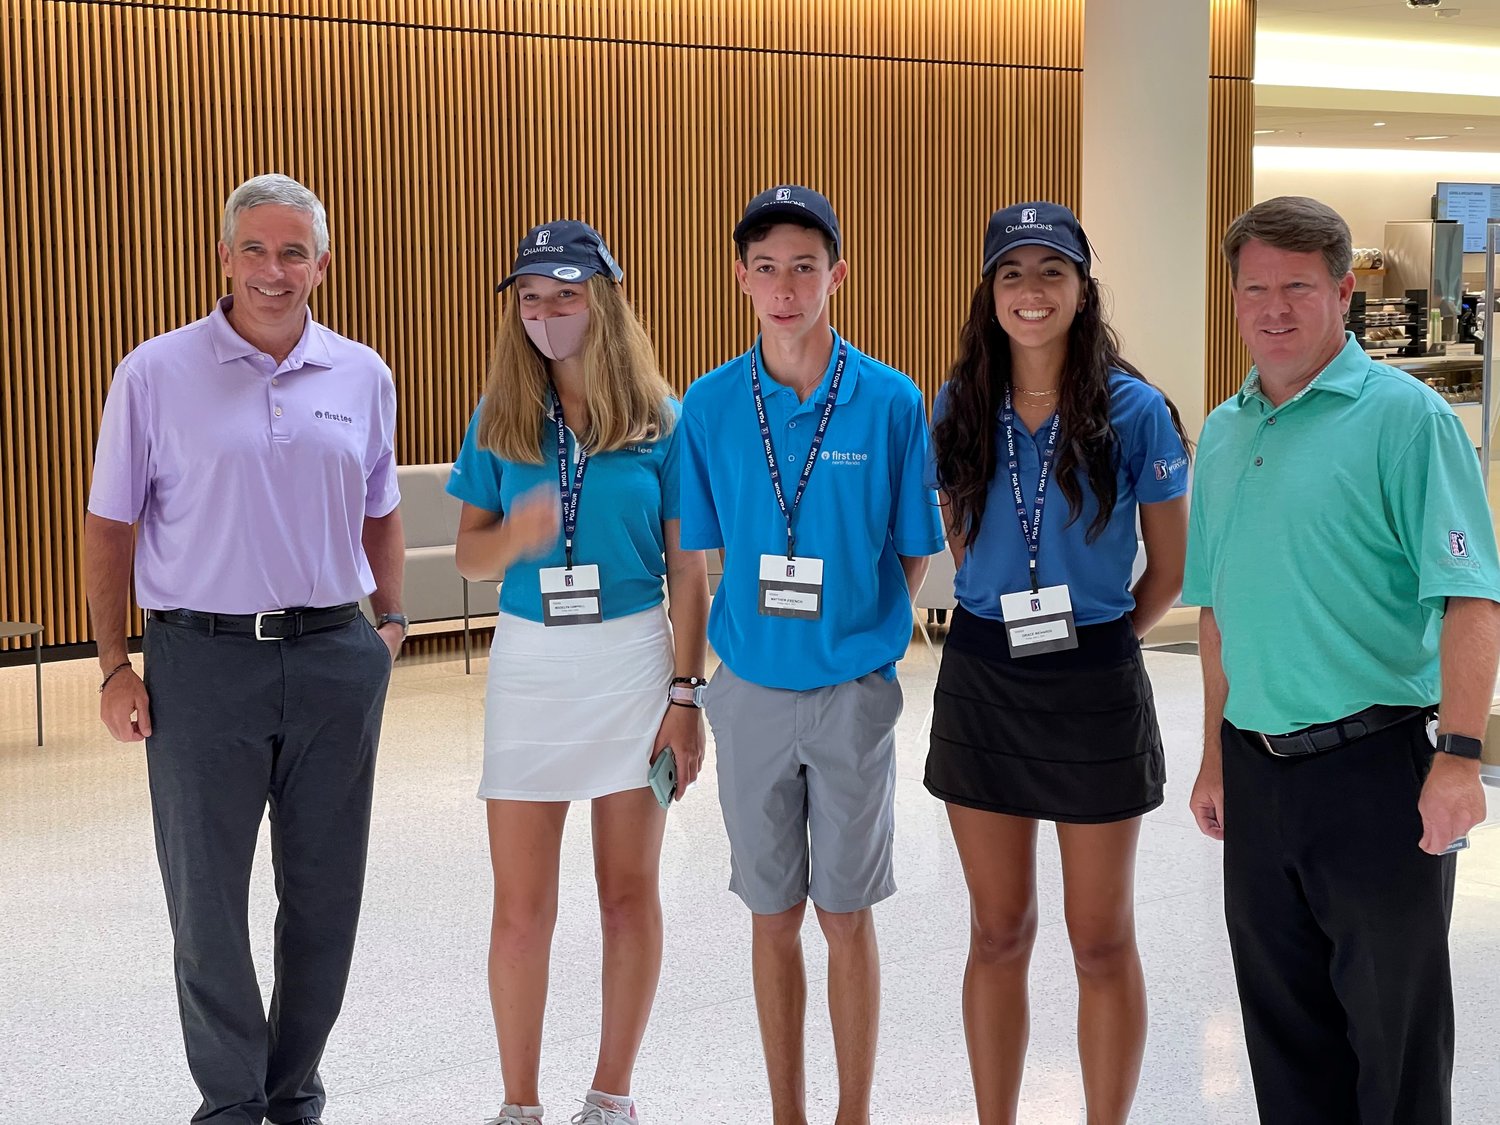 PGA Tour Commissioner Jay Monahan (far left) and PGA Tour Champions President Miller Brady (far right) informed Madelyn Campbell, Matthew French and Grace Richards they were invited to play Pebble Beach Golf Links in September.